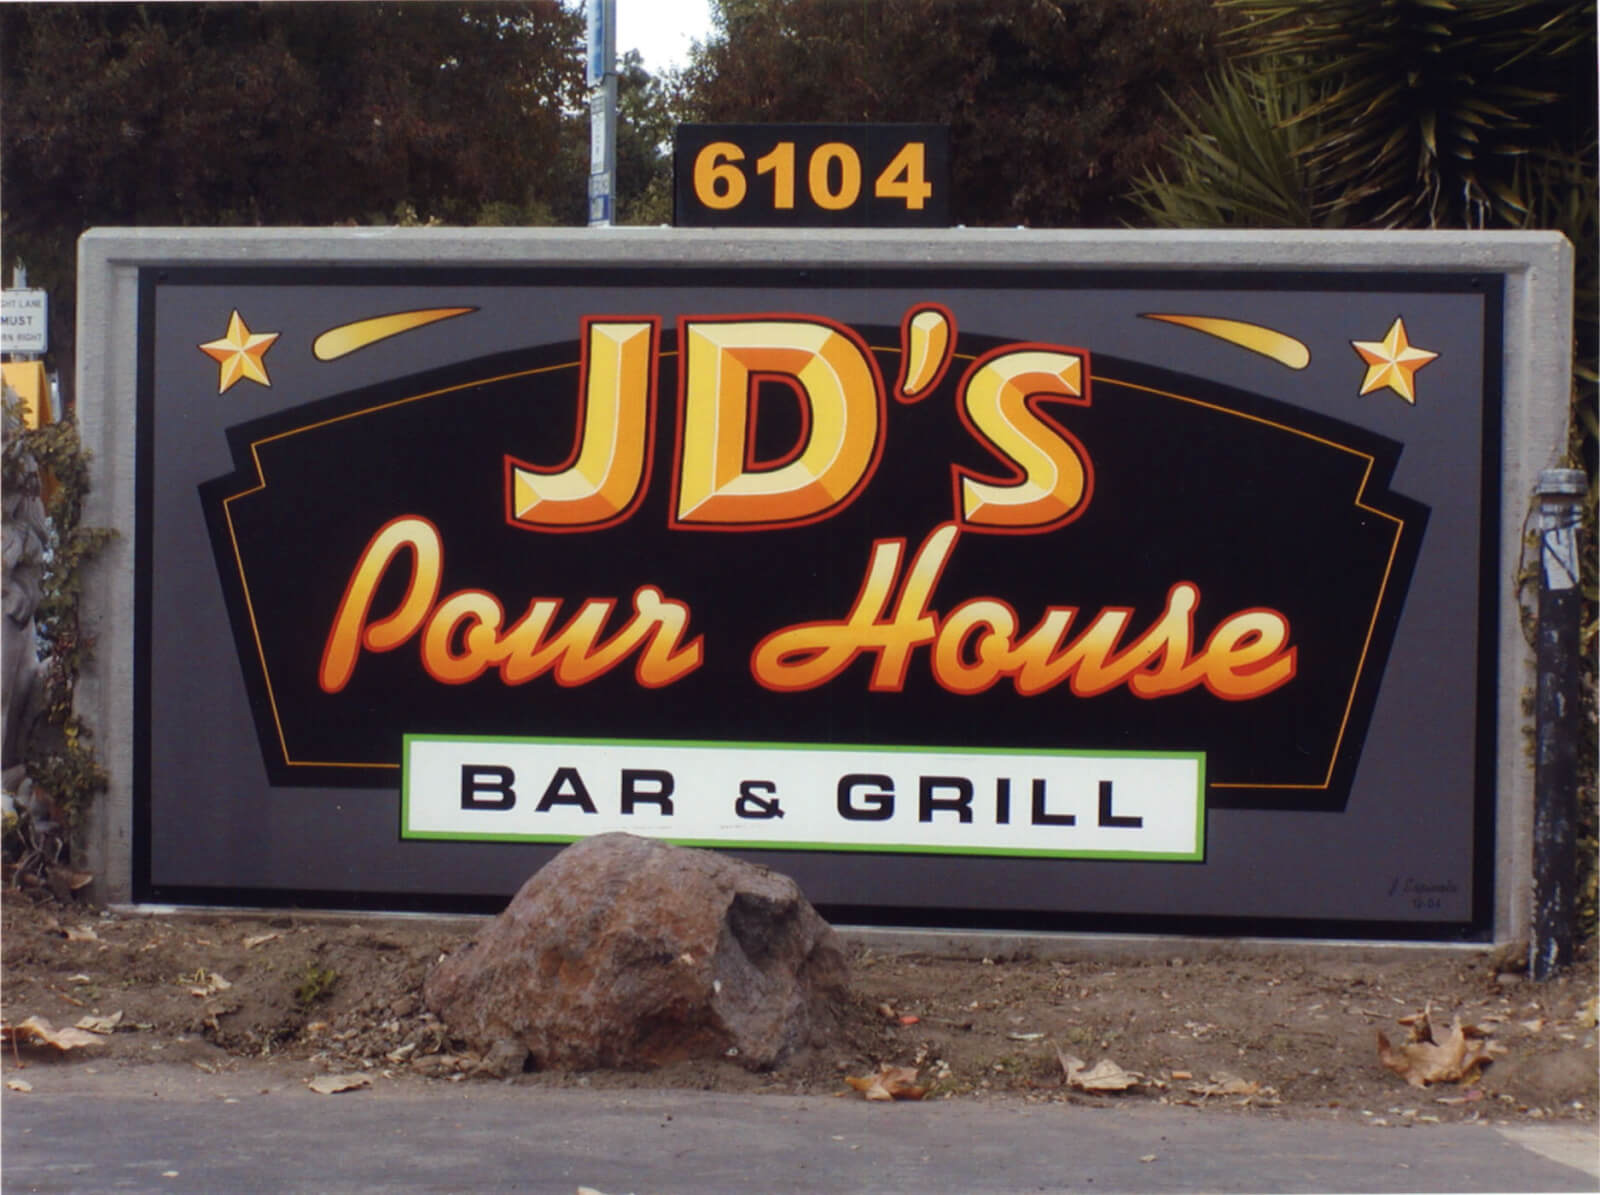 San Jose restaurant sign JDs poor house bar and grill monument